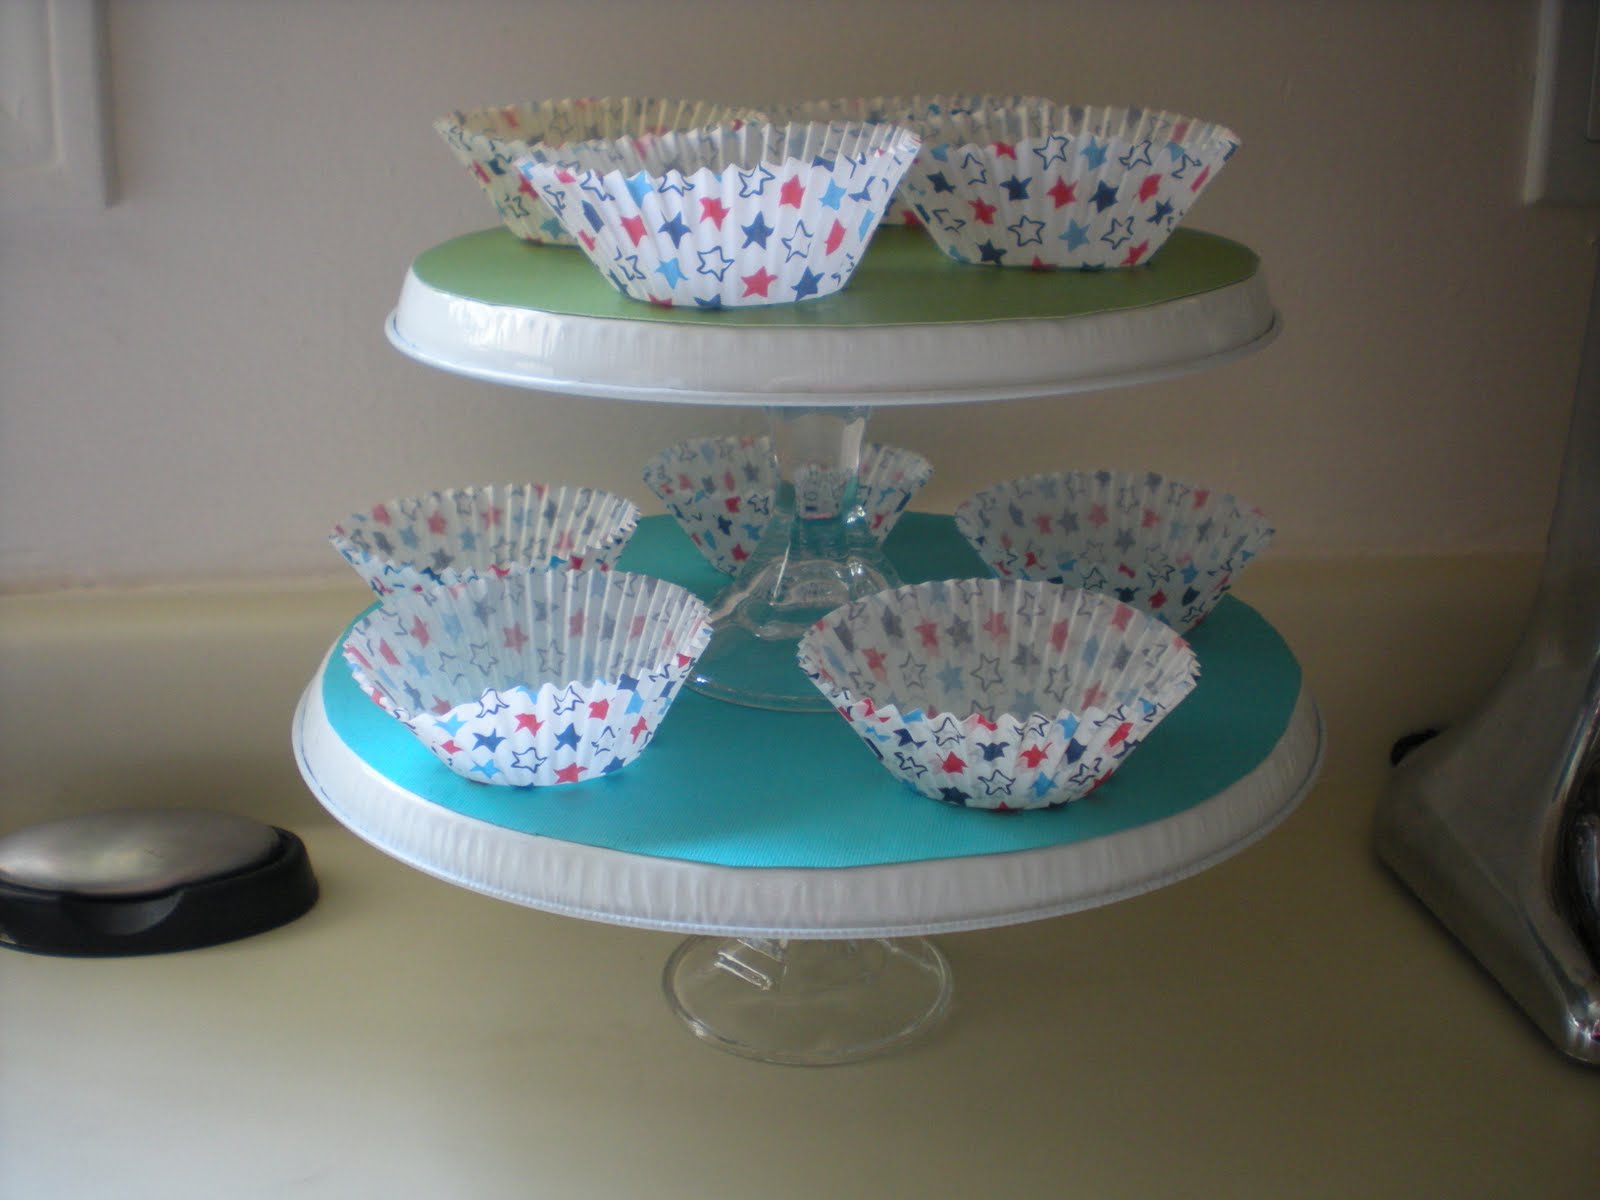 square wedding cake stands Or both stands for cupcakes, muffins, etc